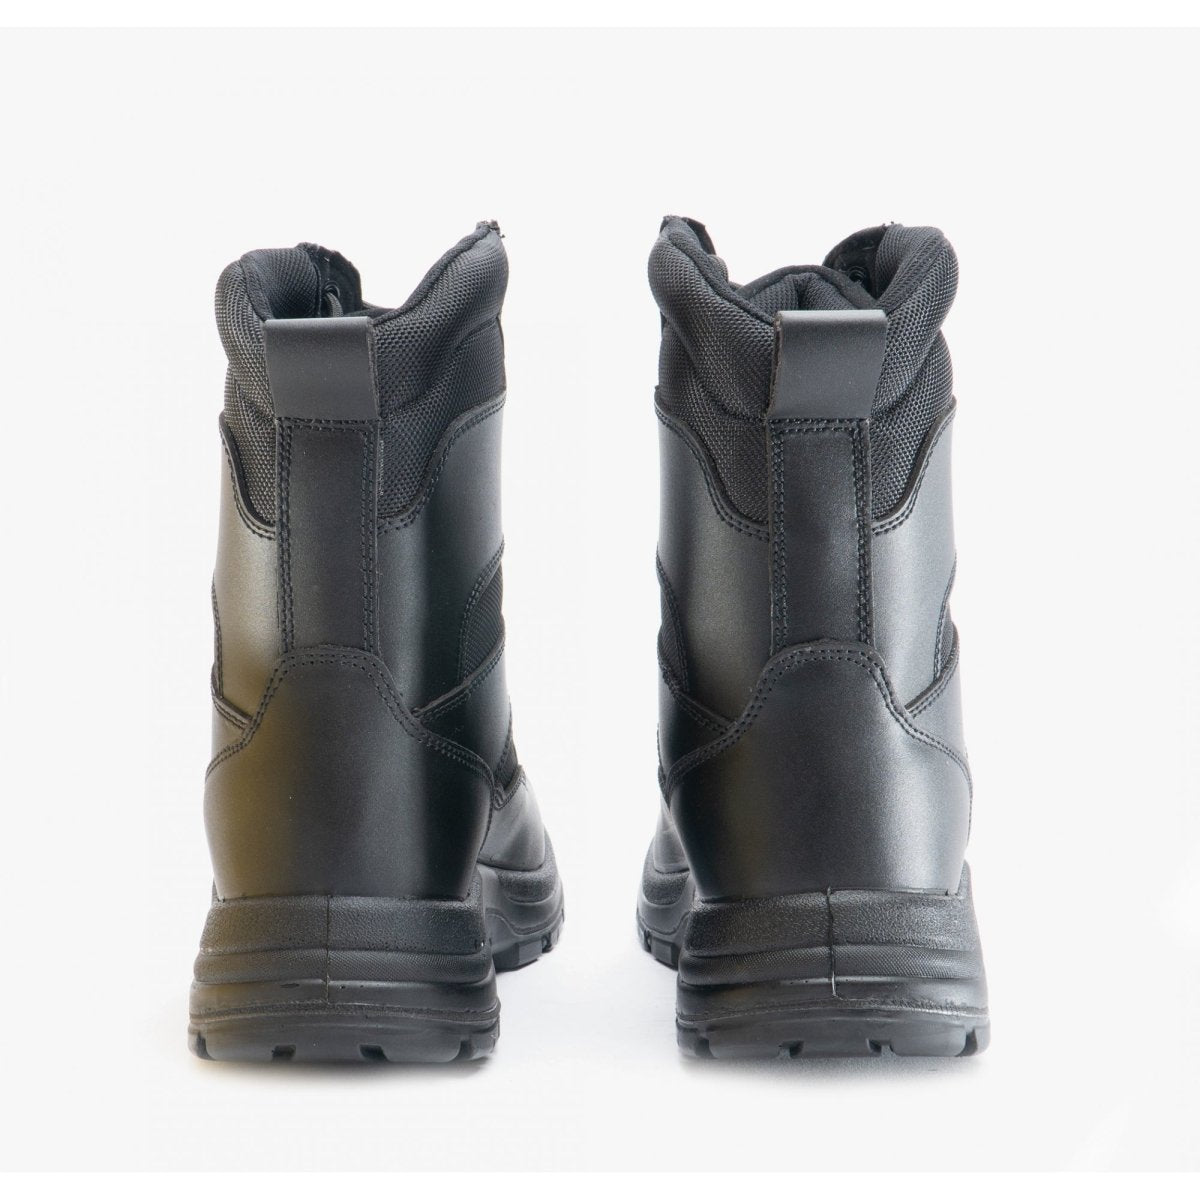 Amblers Safety FS009C Unisex Leather Safety Boots Black 20623 - 32676 - 04 | STB.co.uk